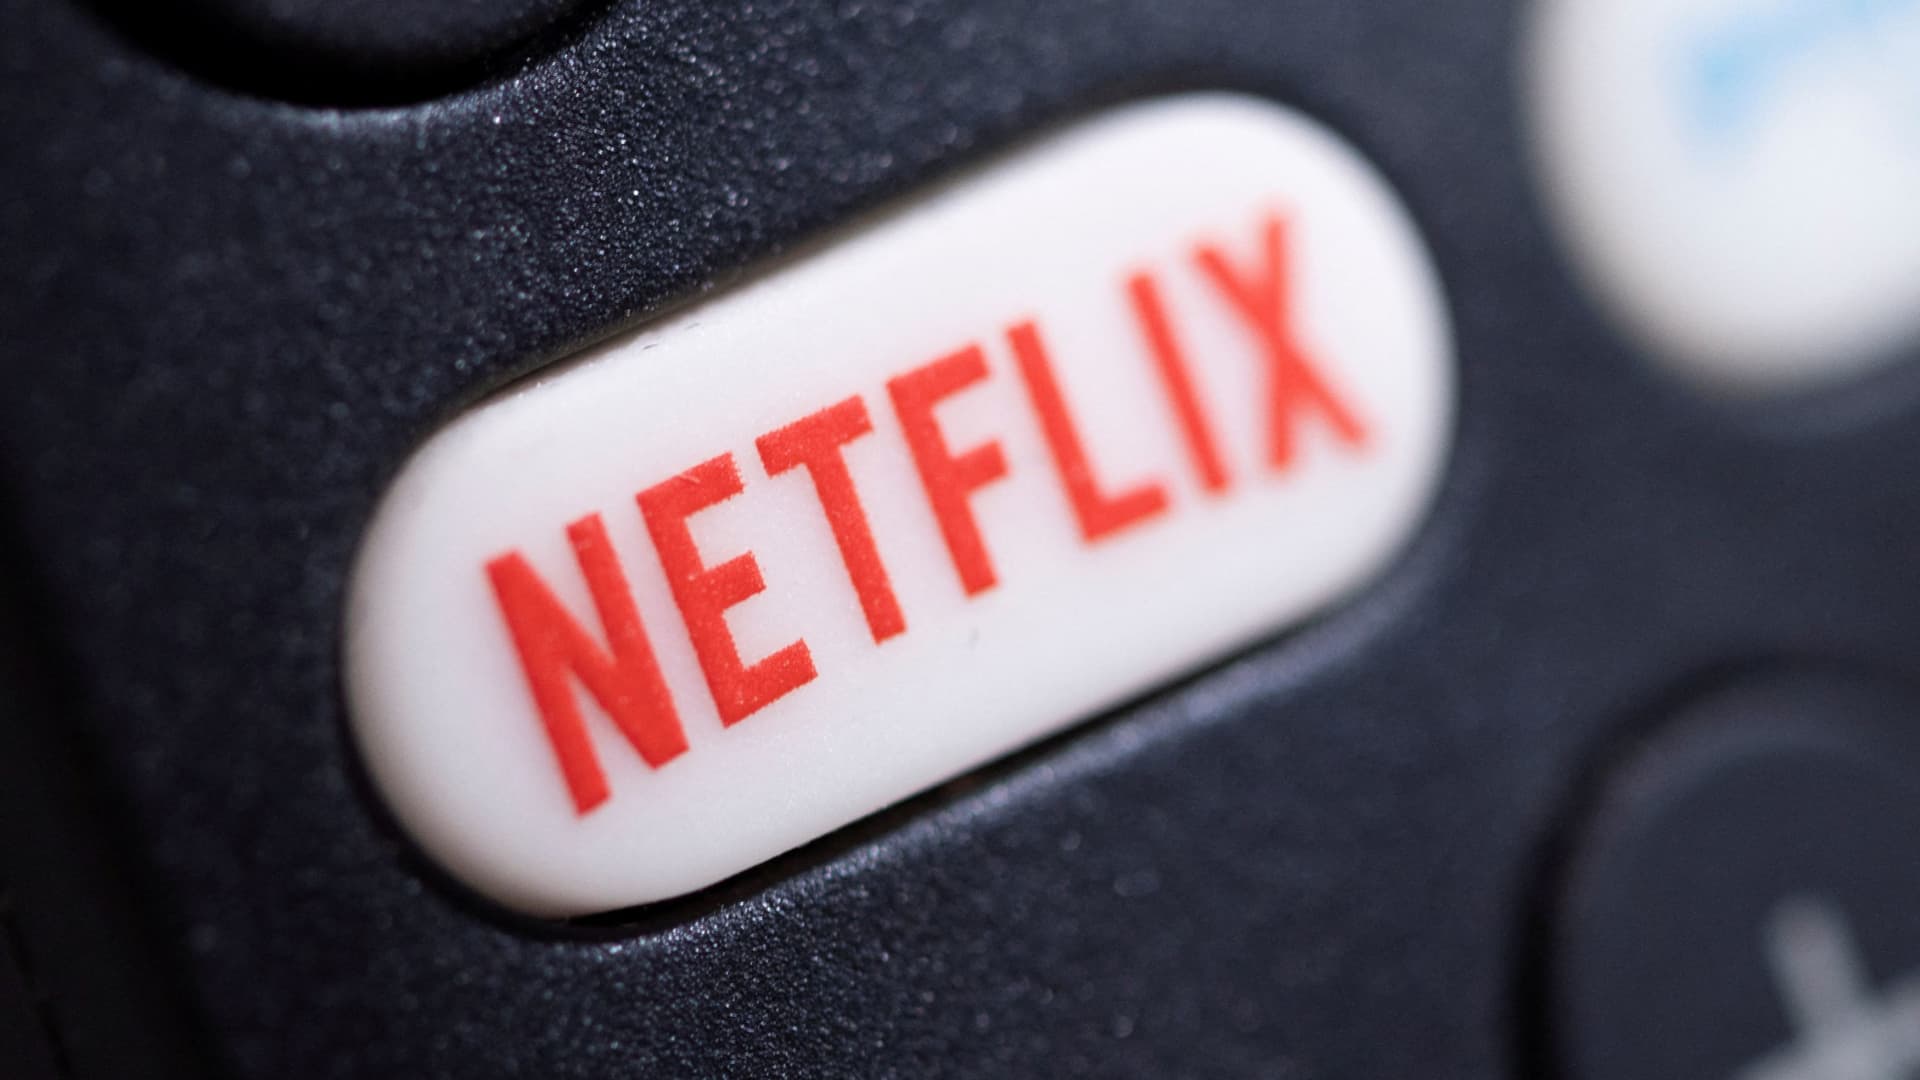 JPMorgan upgrades Netflix, says shares can rally nearly 40% as streamer focuses on ad tier